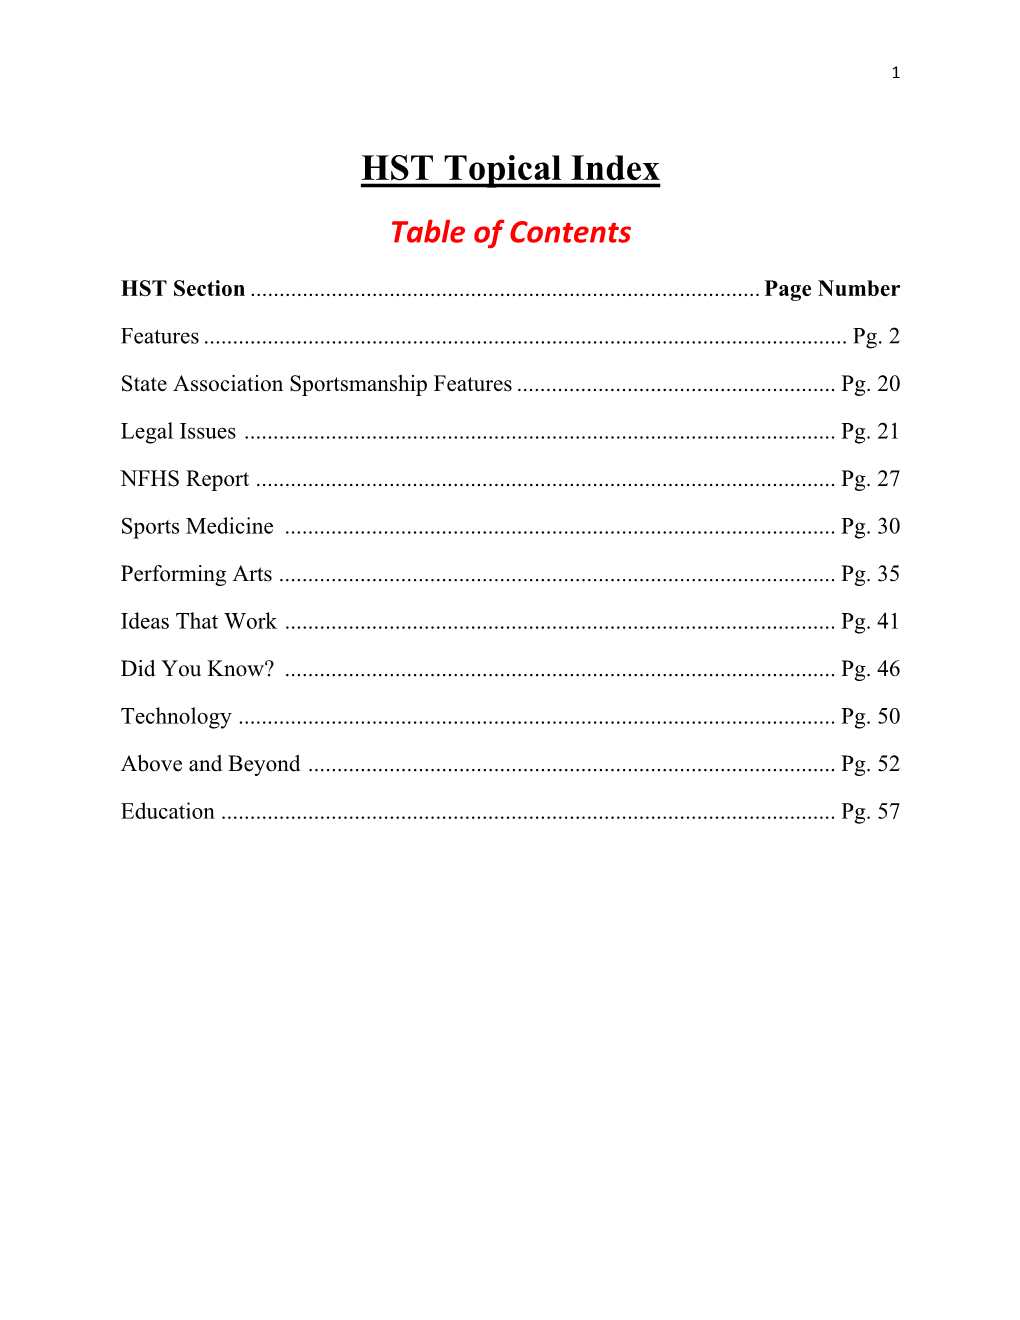 HST Topical Index Table of Contents